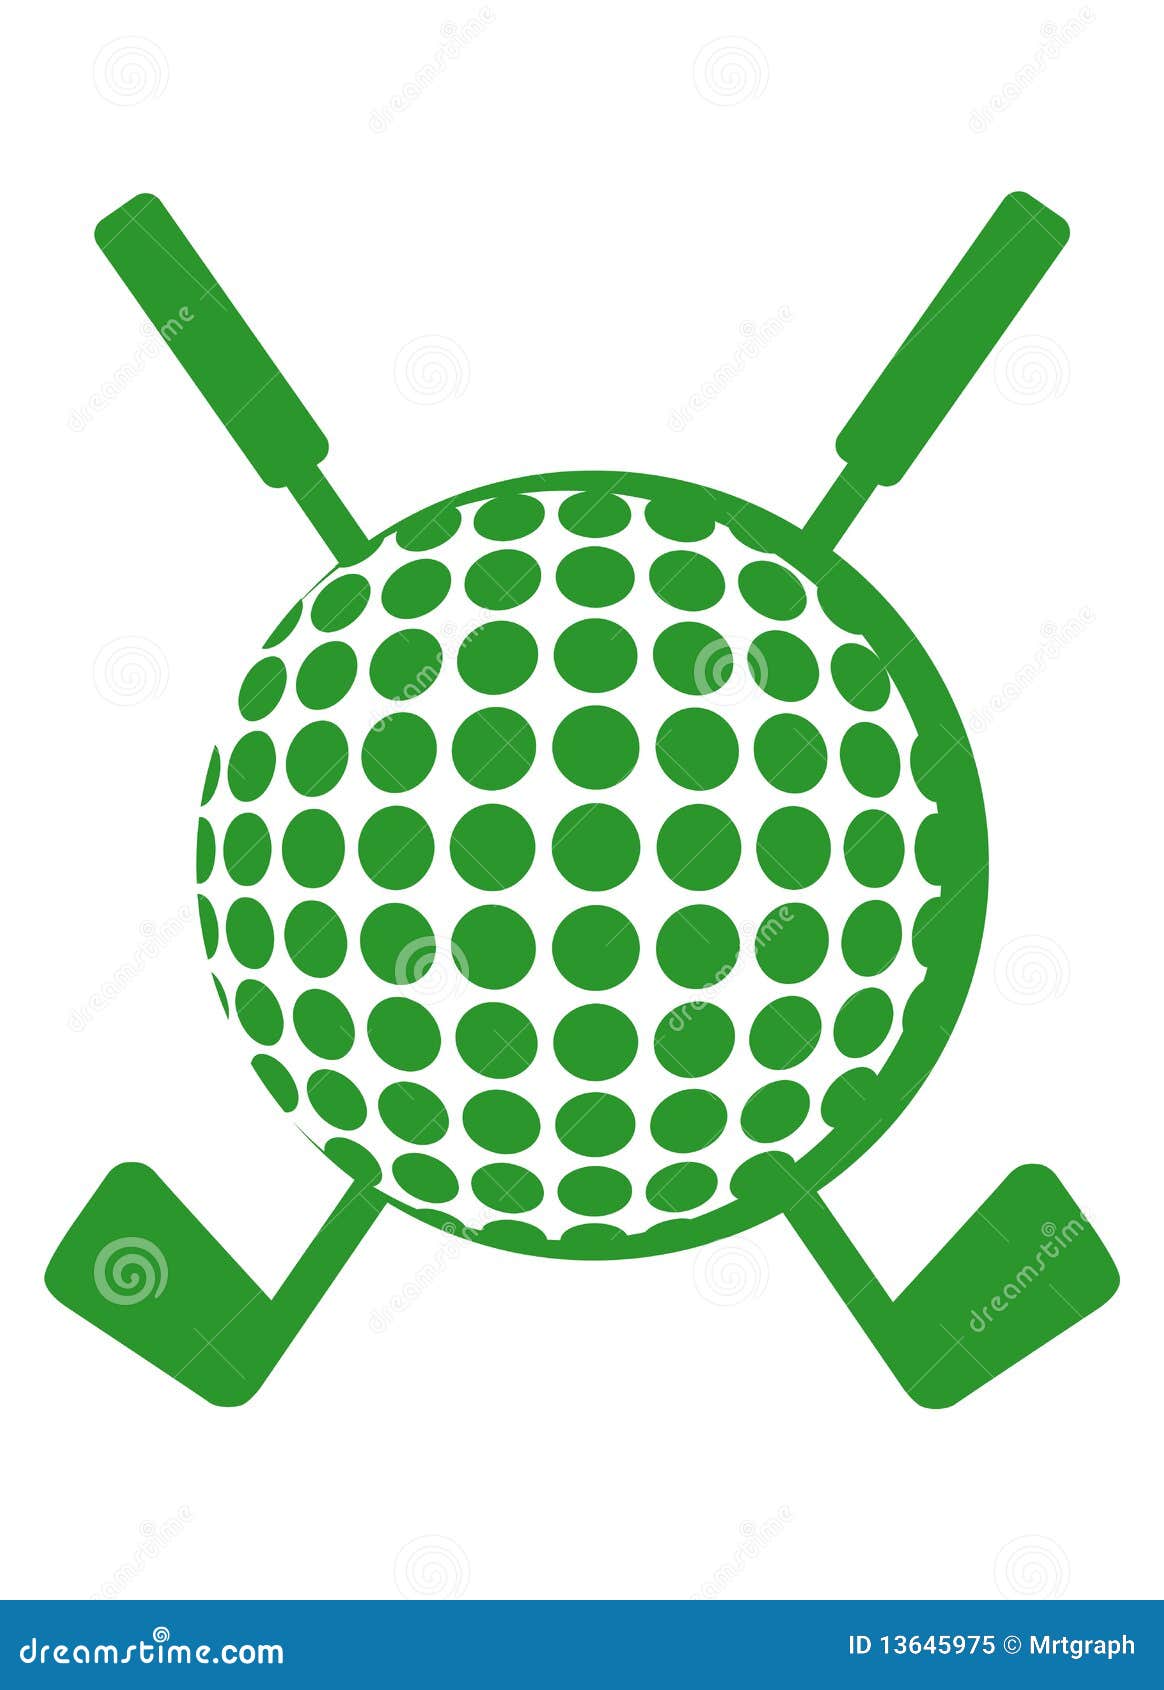 golf clubs and balls clipart - photo #14